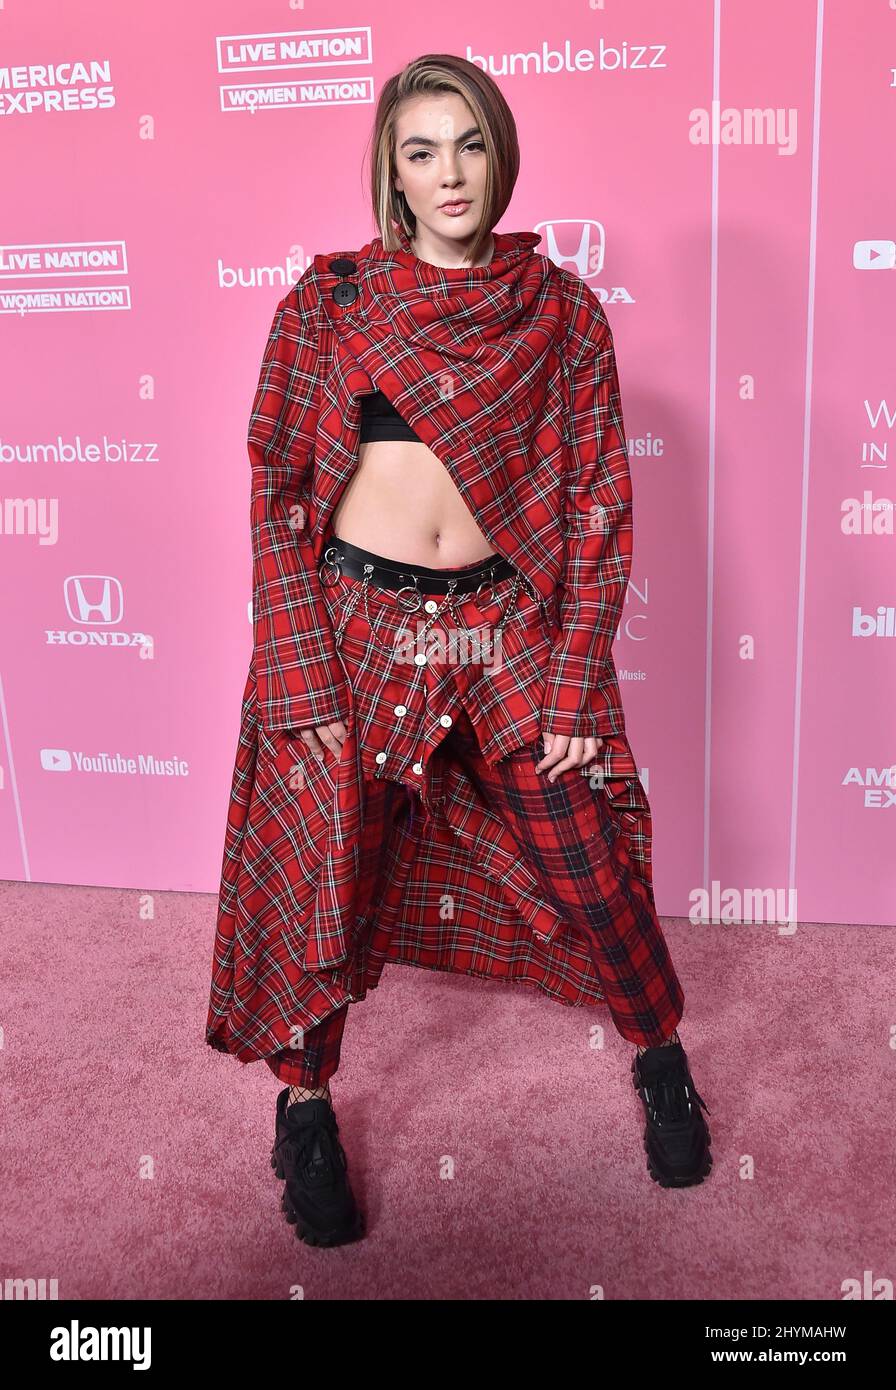 Evie Irie attending the Billboard's Women In Music 2019 event in Hollywood, USA on Thursday December 13, 2019. Stock Photo